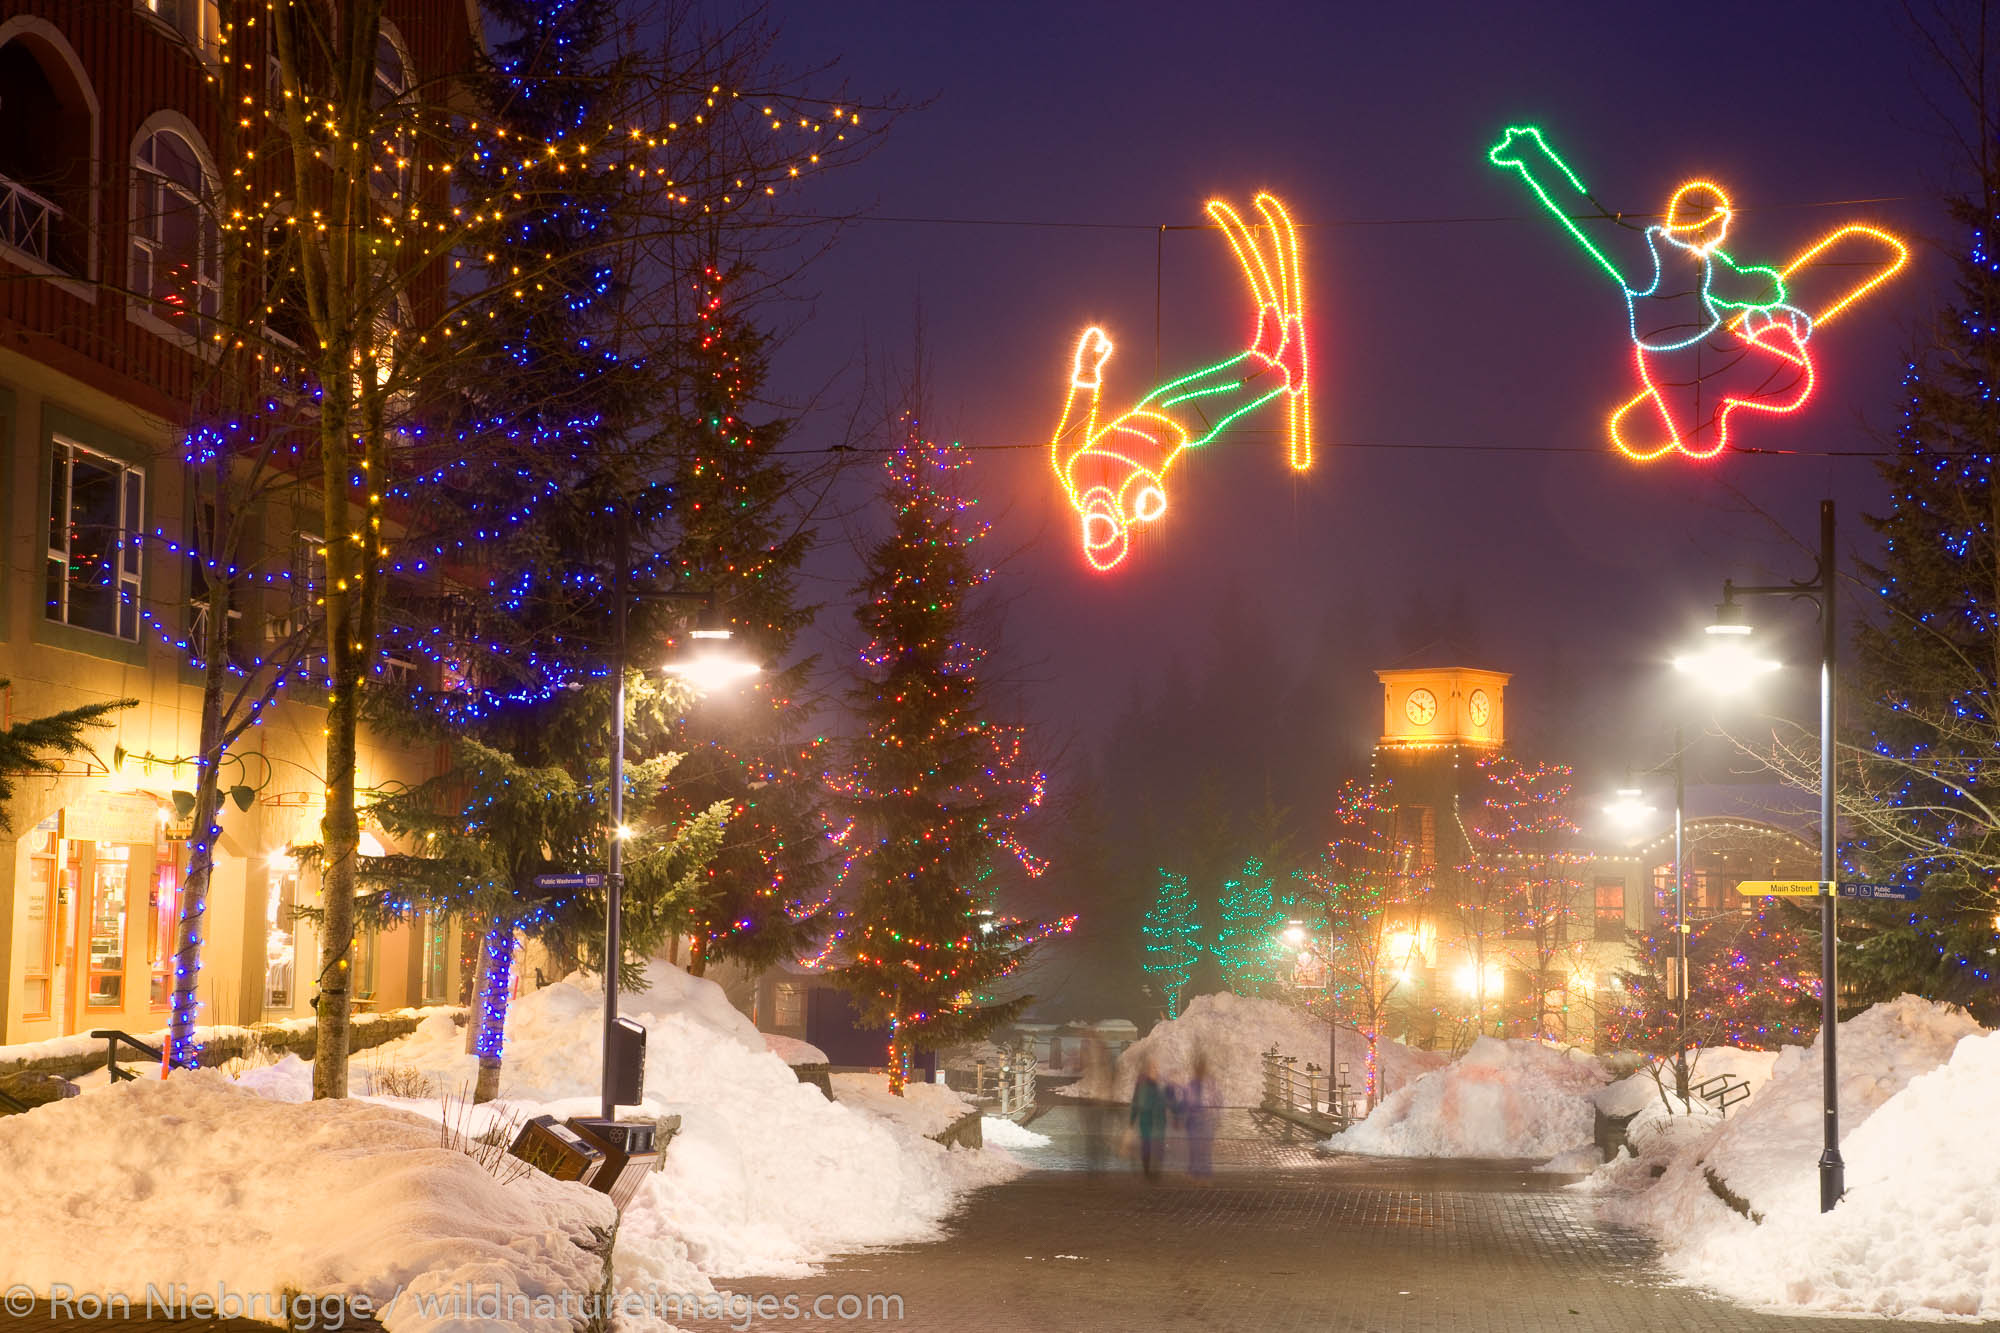 Whistler Village, host of the 2010 Vancouver Winter Olympics, Whistler, British Columbia, Canada.